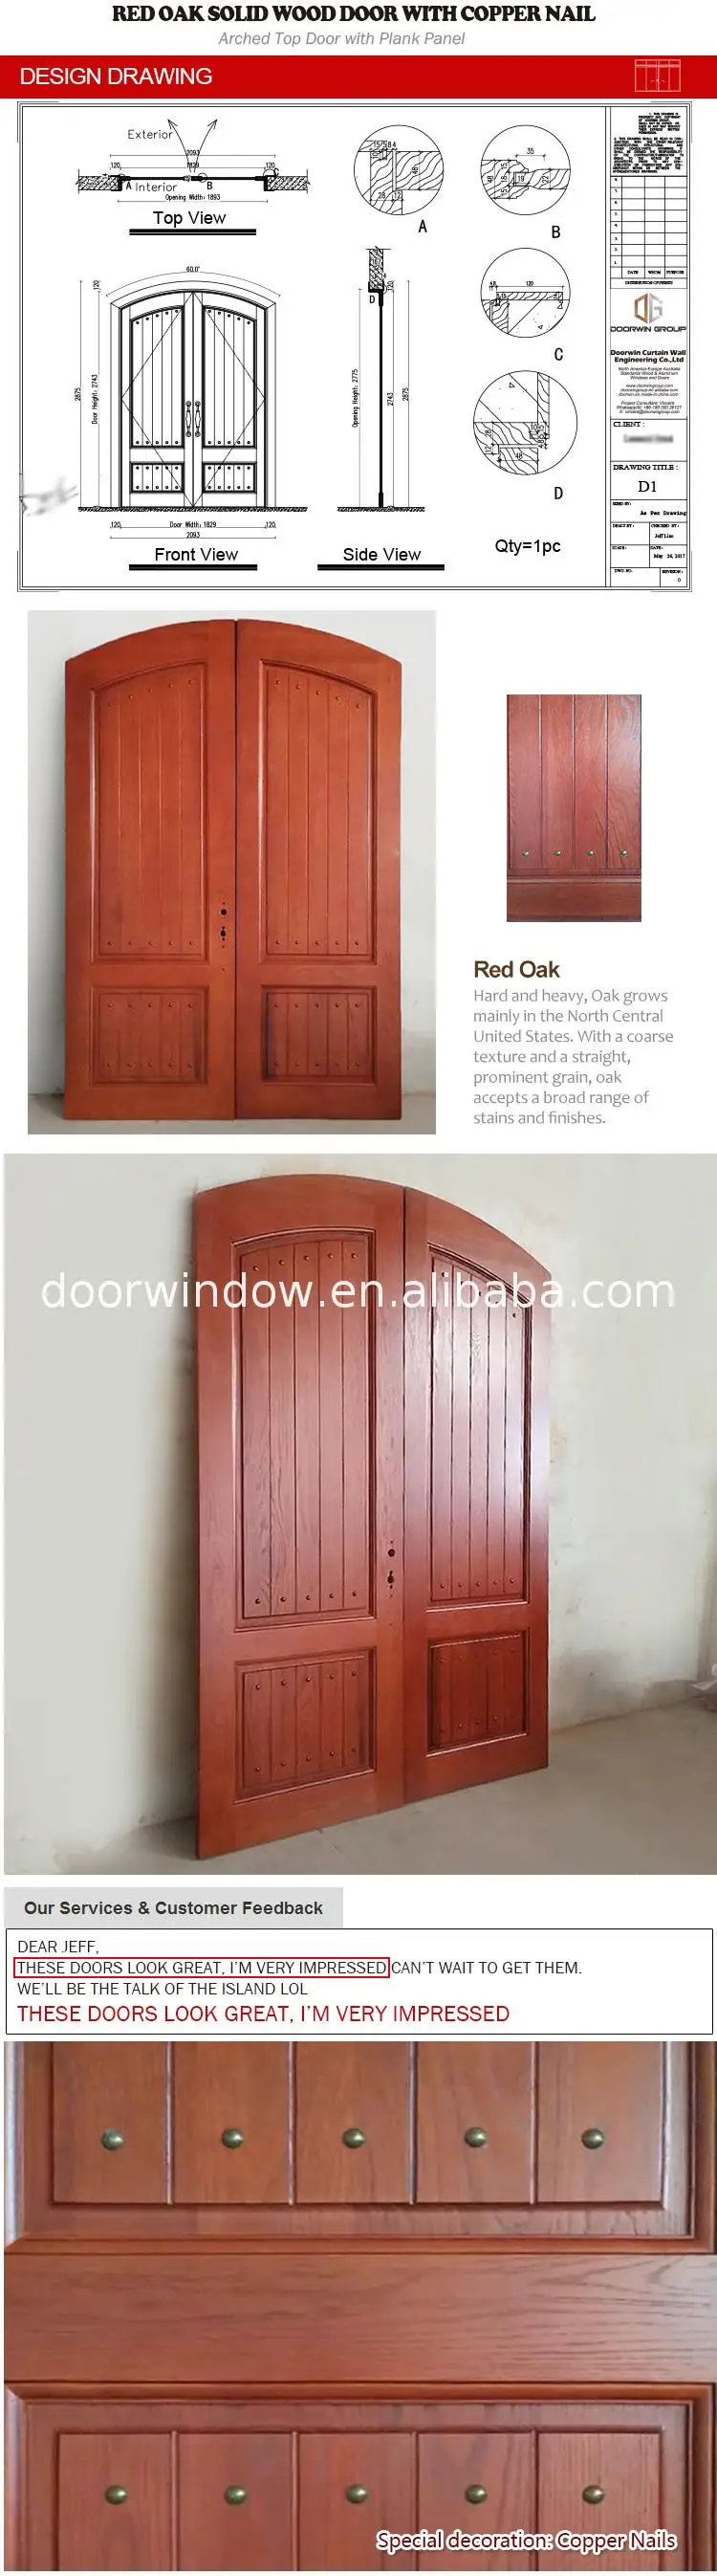 Best selling items entry spring door supplier double casement price doors and windows for patio